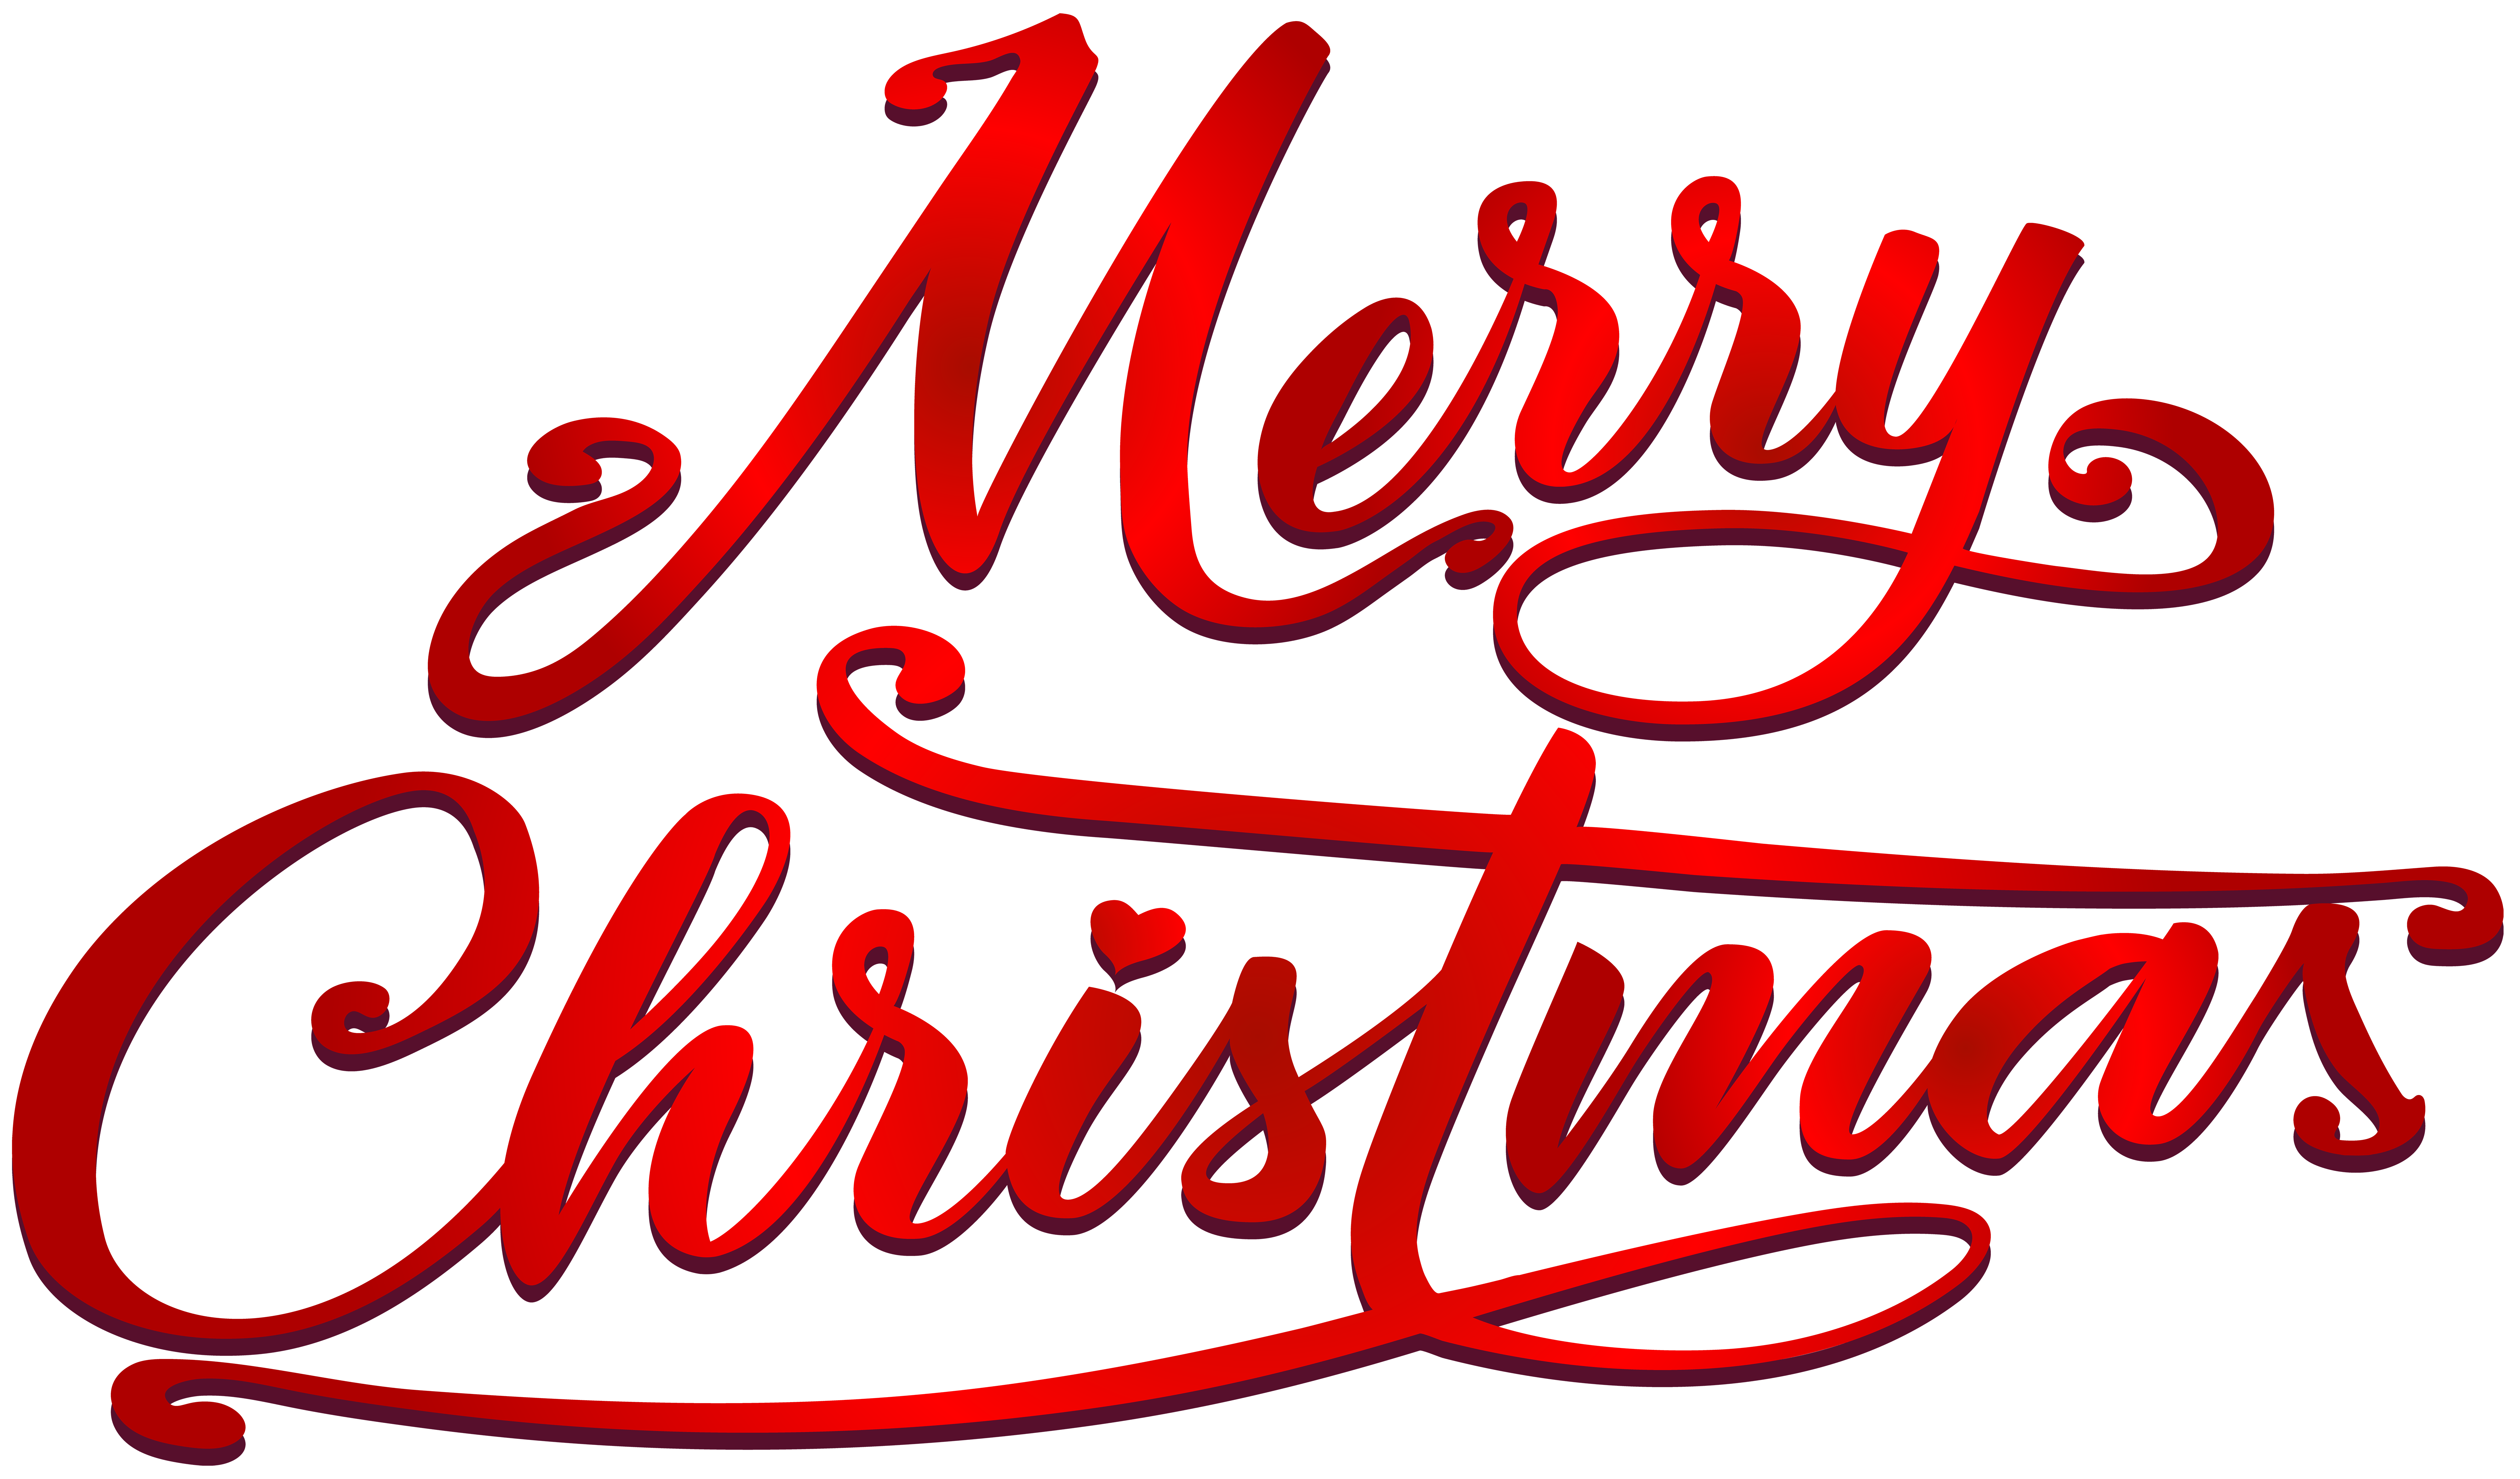 Merry Christmas Text PNG Clip Art Image | Gallery Yopriceville - High ...